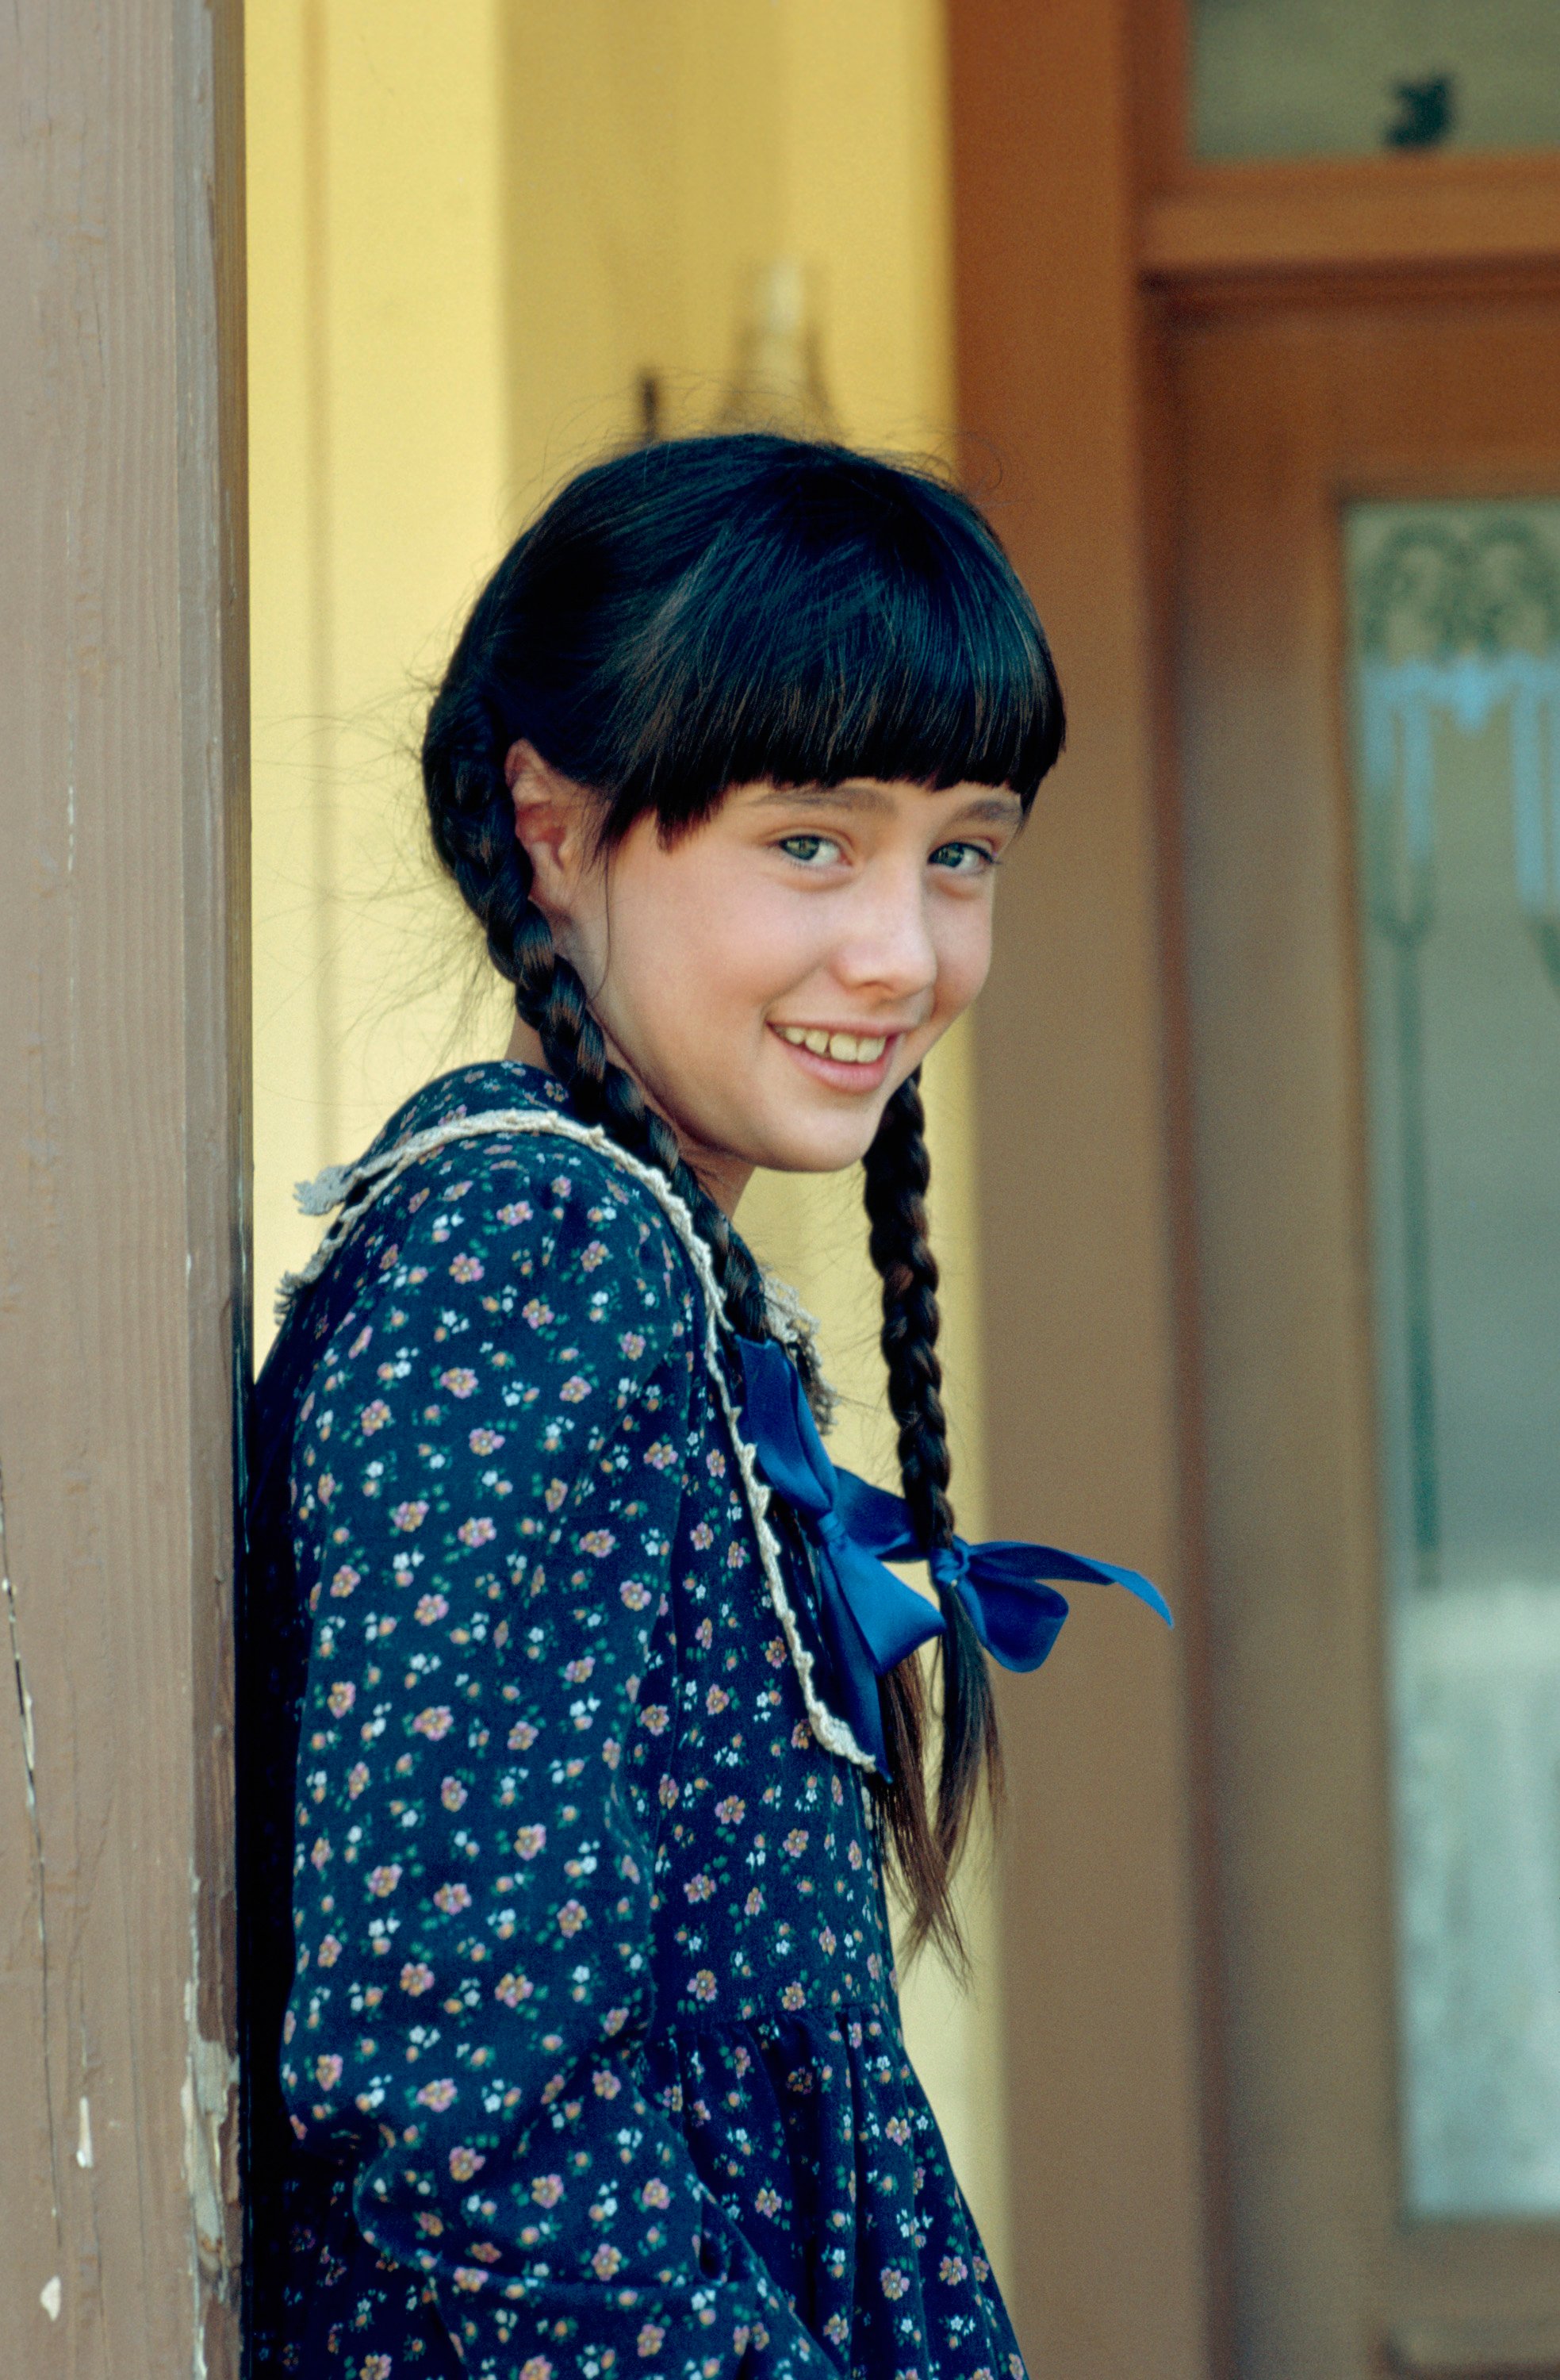 Shannen Doherty in 'Little House on the Prairie'